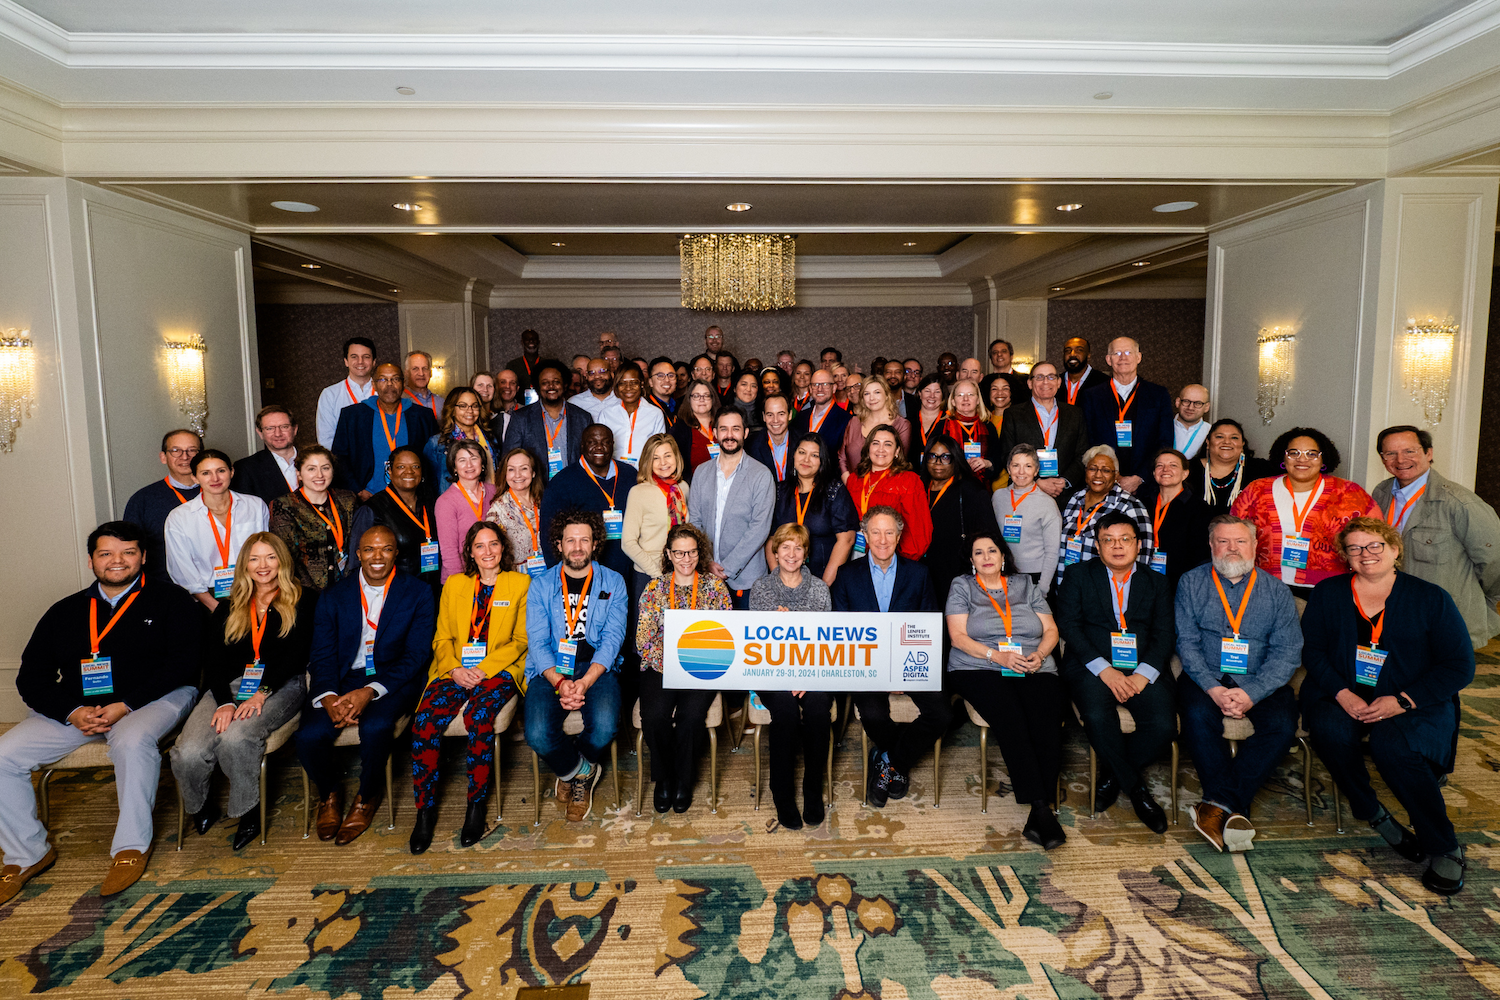 A group photo of attendees at the Local News Summit.